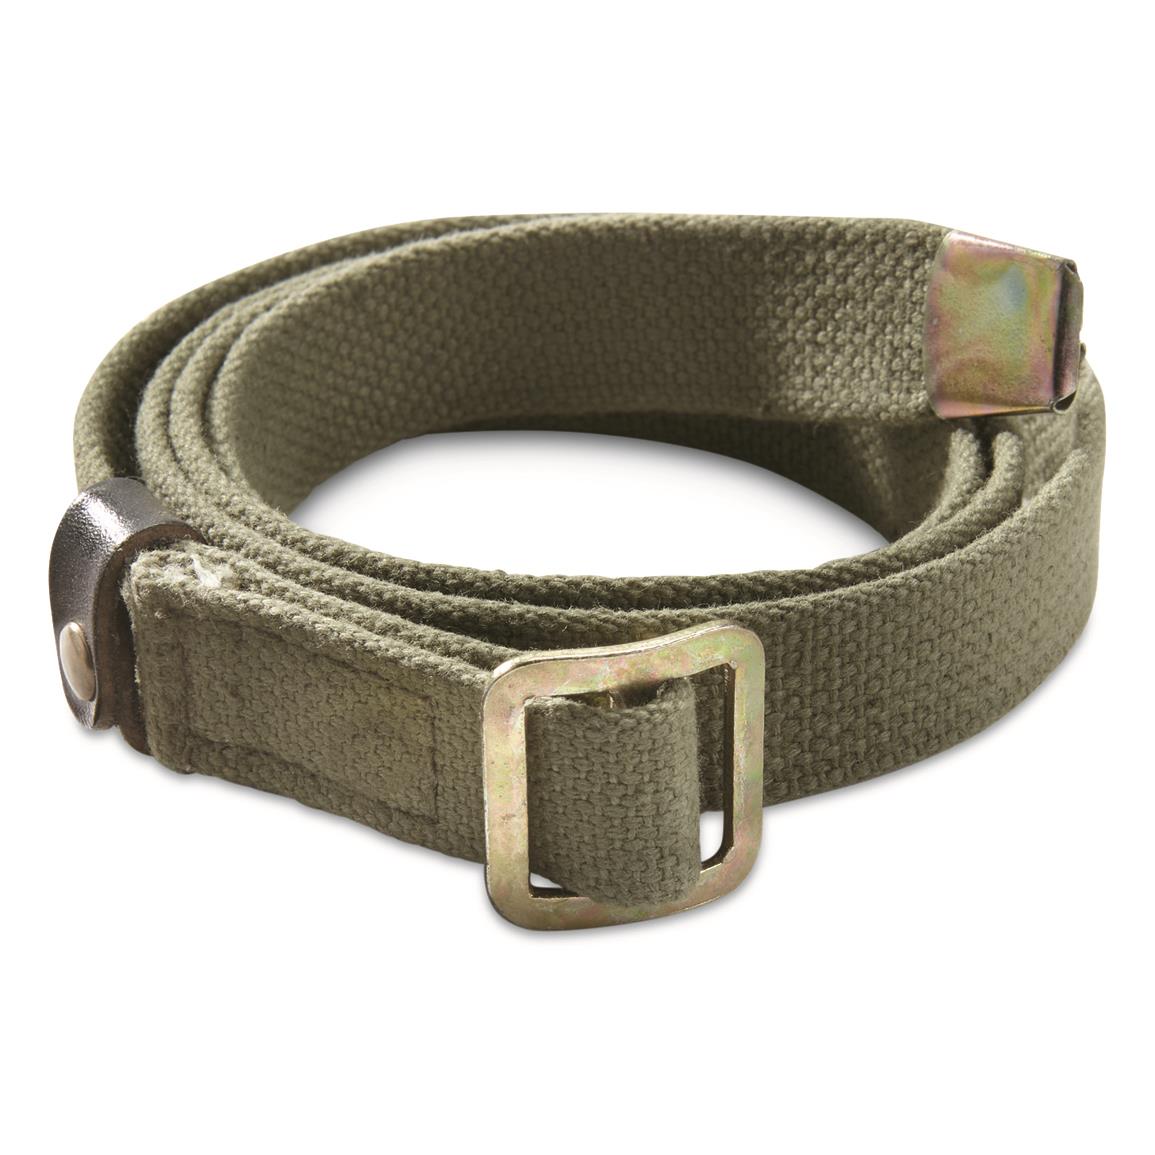 Russian Military Surplus Trouser Belts, Olive Drab, 4 Pack, Like New, Olive Drab